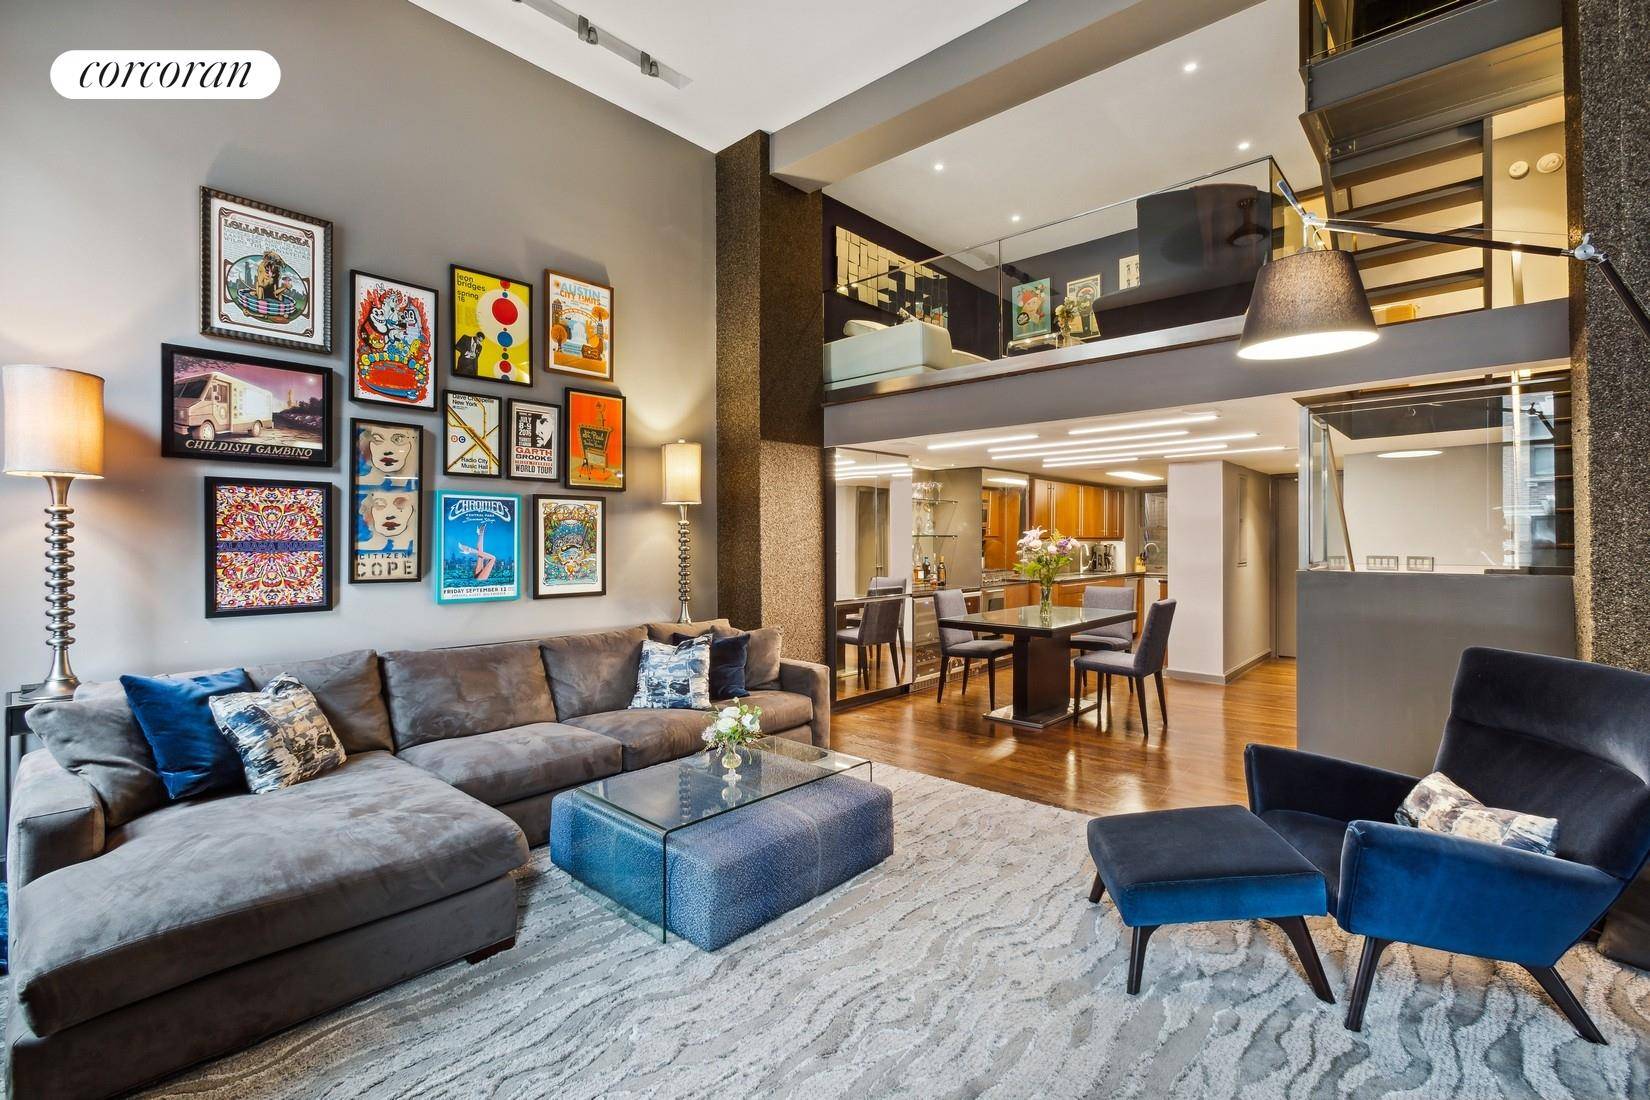 305 Second Avenue, Apt. 318, New York, NY 10003 Located in Gramercy Park's elegant historic Rutherford Place, this massive 2 bed, 2 bath triplex condo with loft and private patio ...